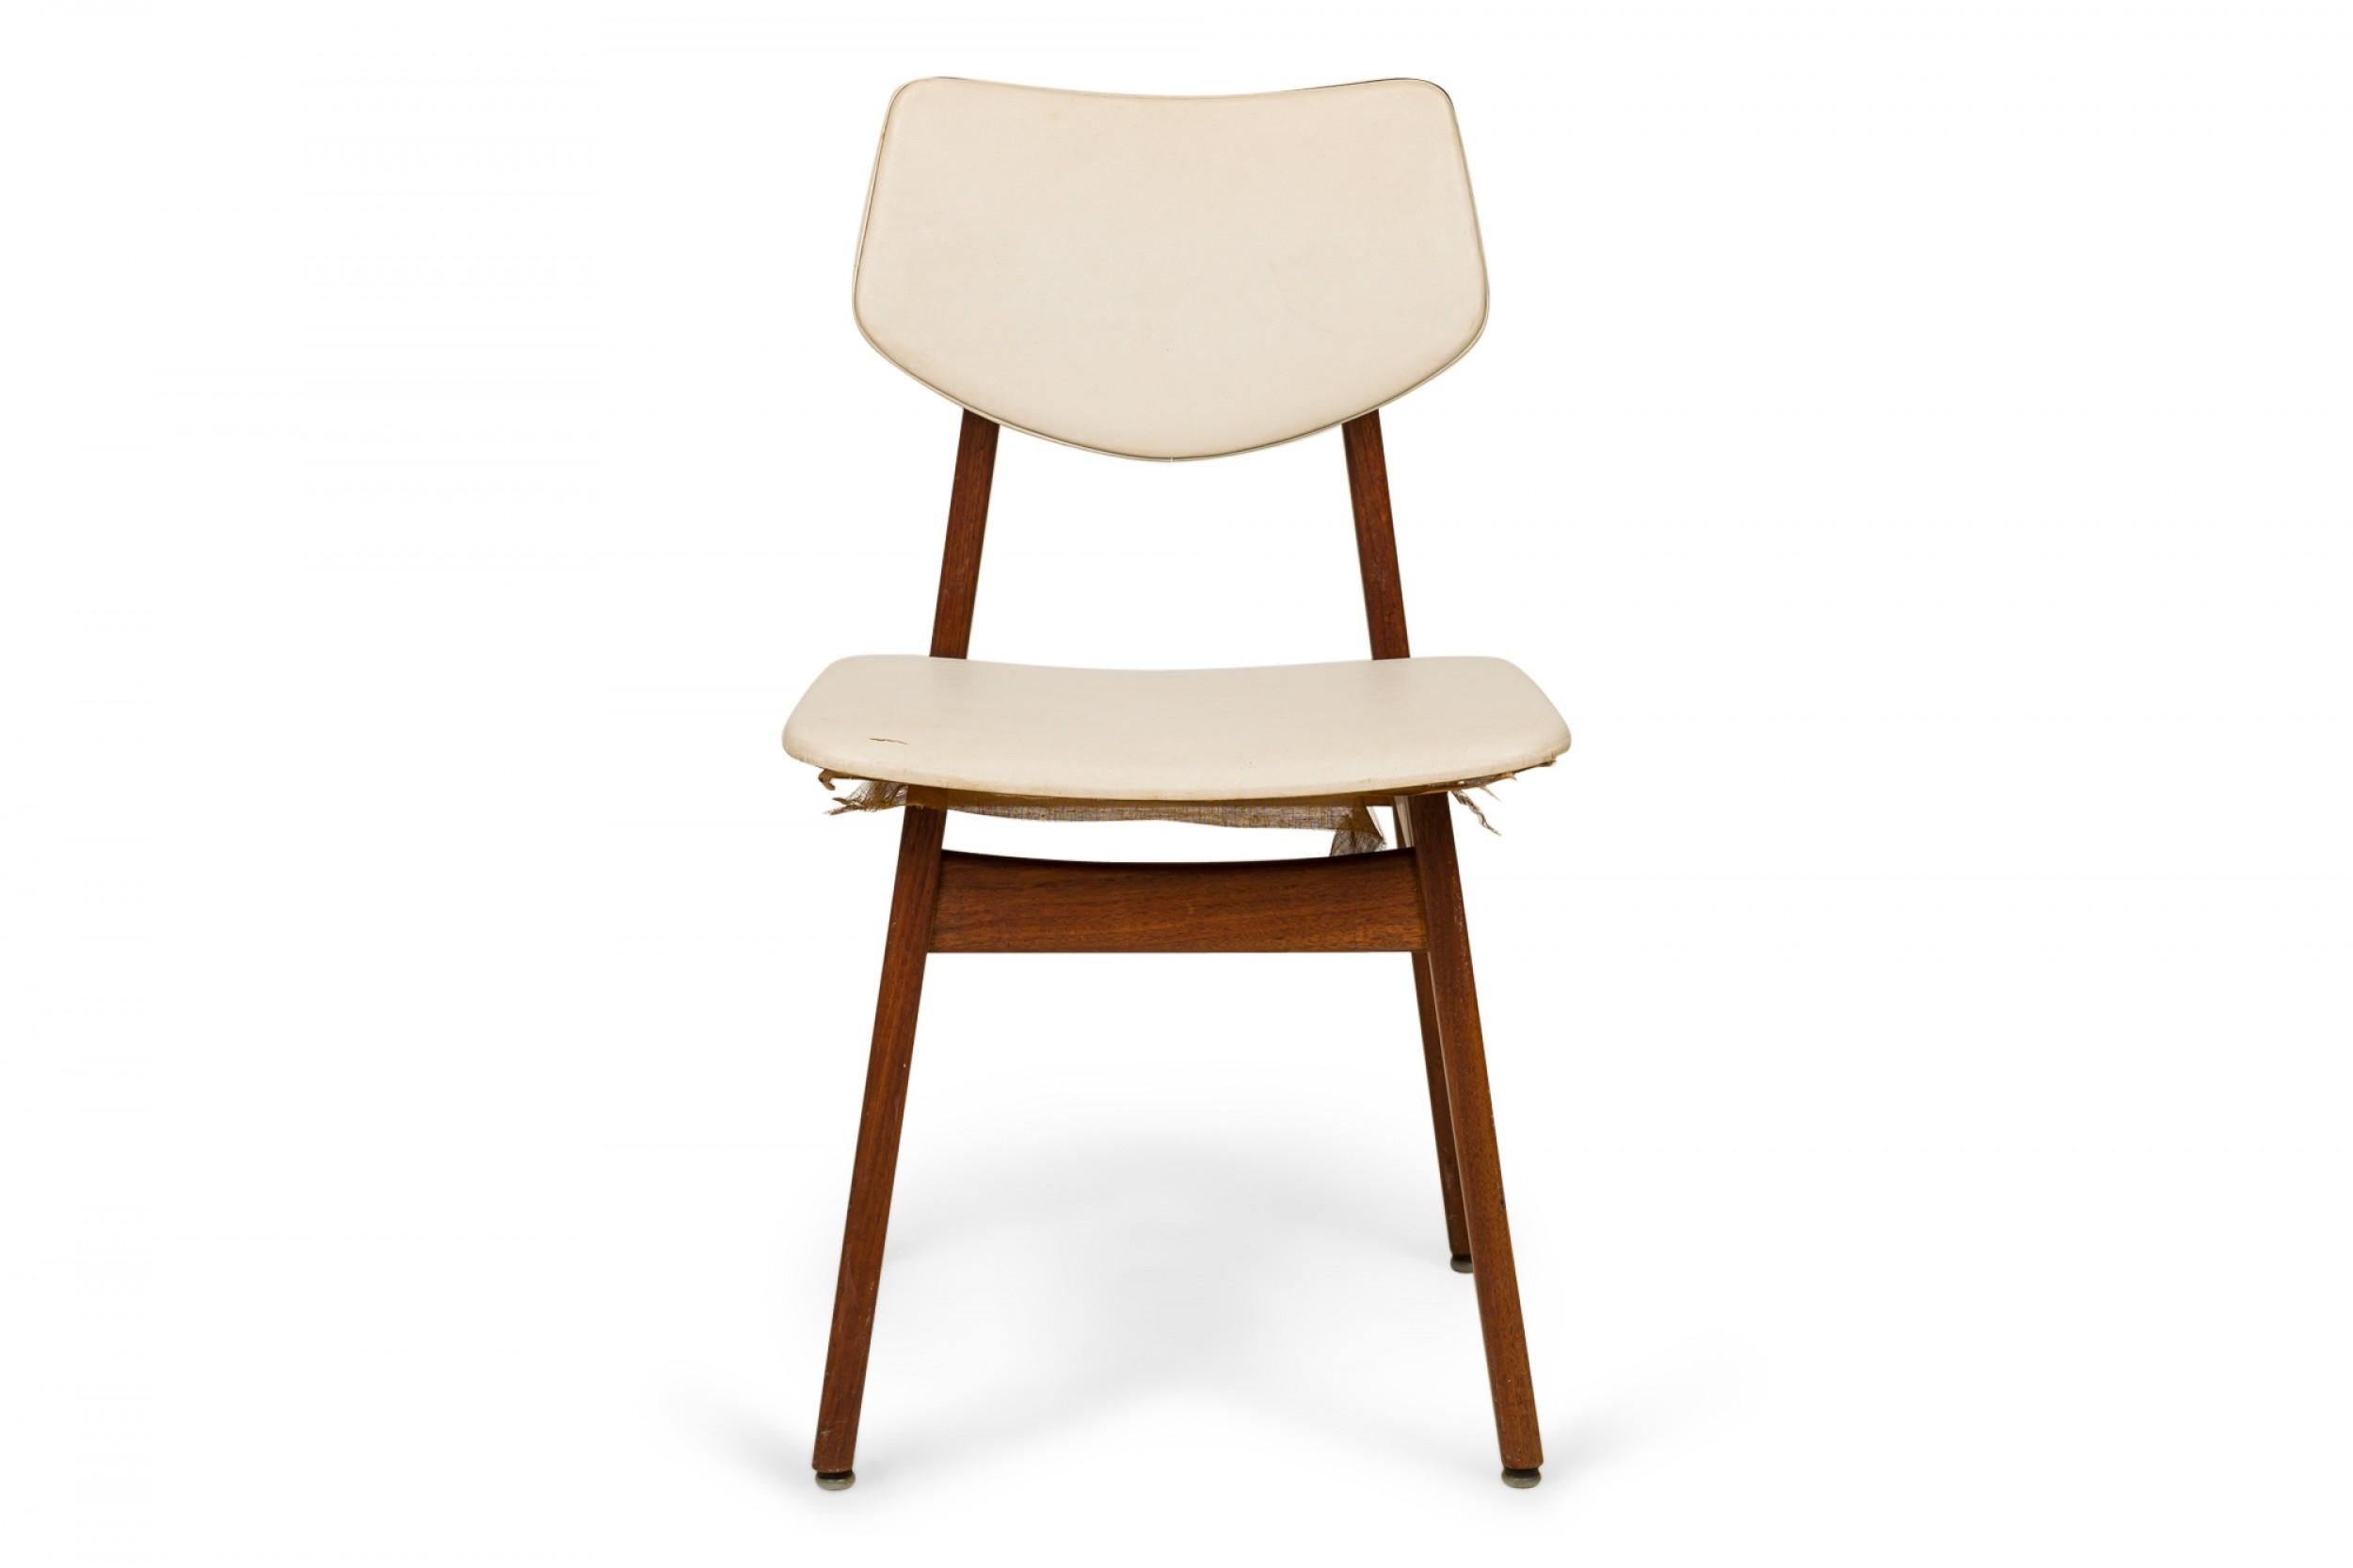 Danish Mid-Century dining side chair with a teak wood frame and off-white vinyl upholstered seat and chair back. (JENS RISOM)
